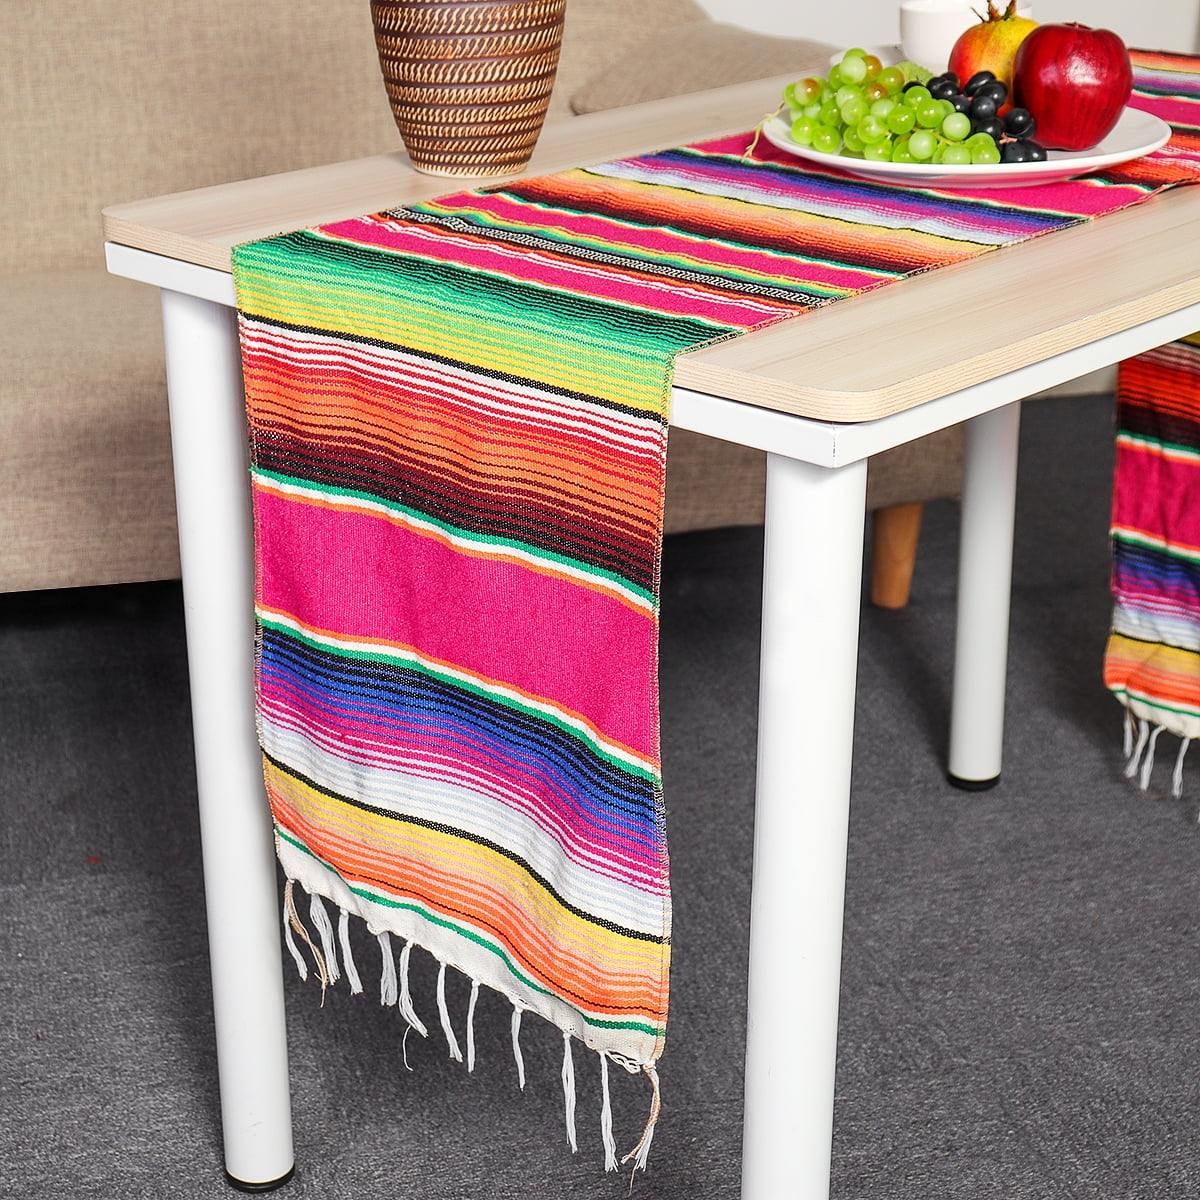 Mexican Serape Table Runner Home Party Decor Fringe Cotton Tablecloth 